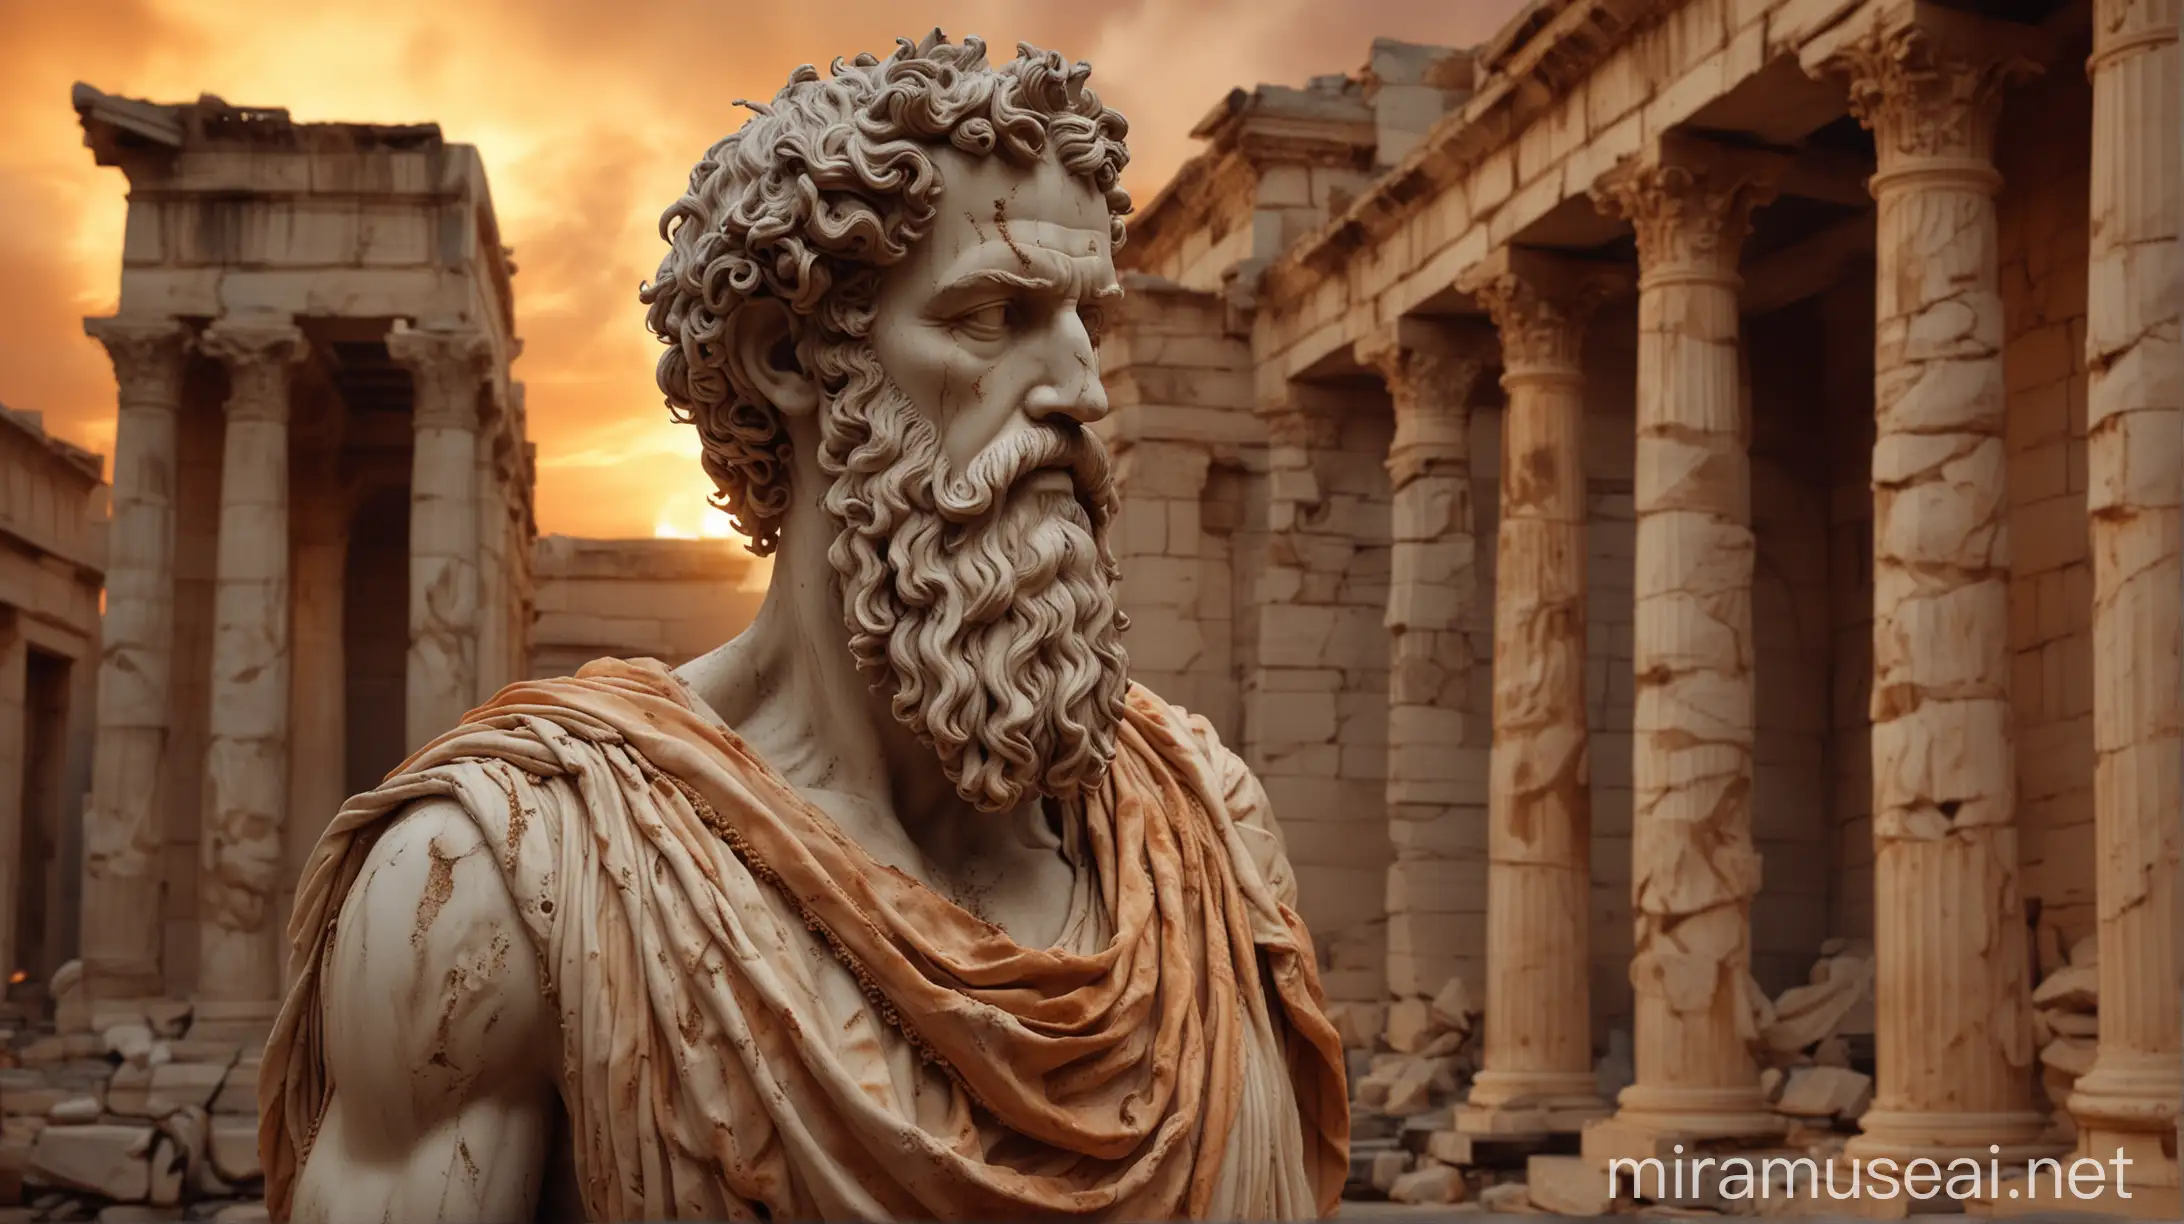 A highly realistic ancient Greek marble statue of a stoic philosopher, muscular shredded body draped in toga, intricate curly beard and furrowed contemplative brow. Dramatic flickering torchlight and swirling smoke atmosphere amidst crumbling architectural ruins. Haunting burnt orange sky, ethereal and timeless scene embodying stoic virtues of wisdom and perseverance against life's impermanence